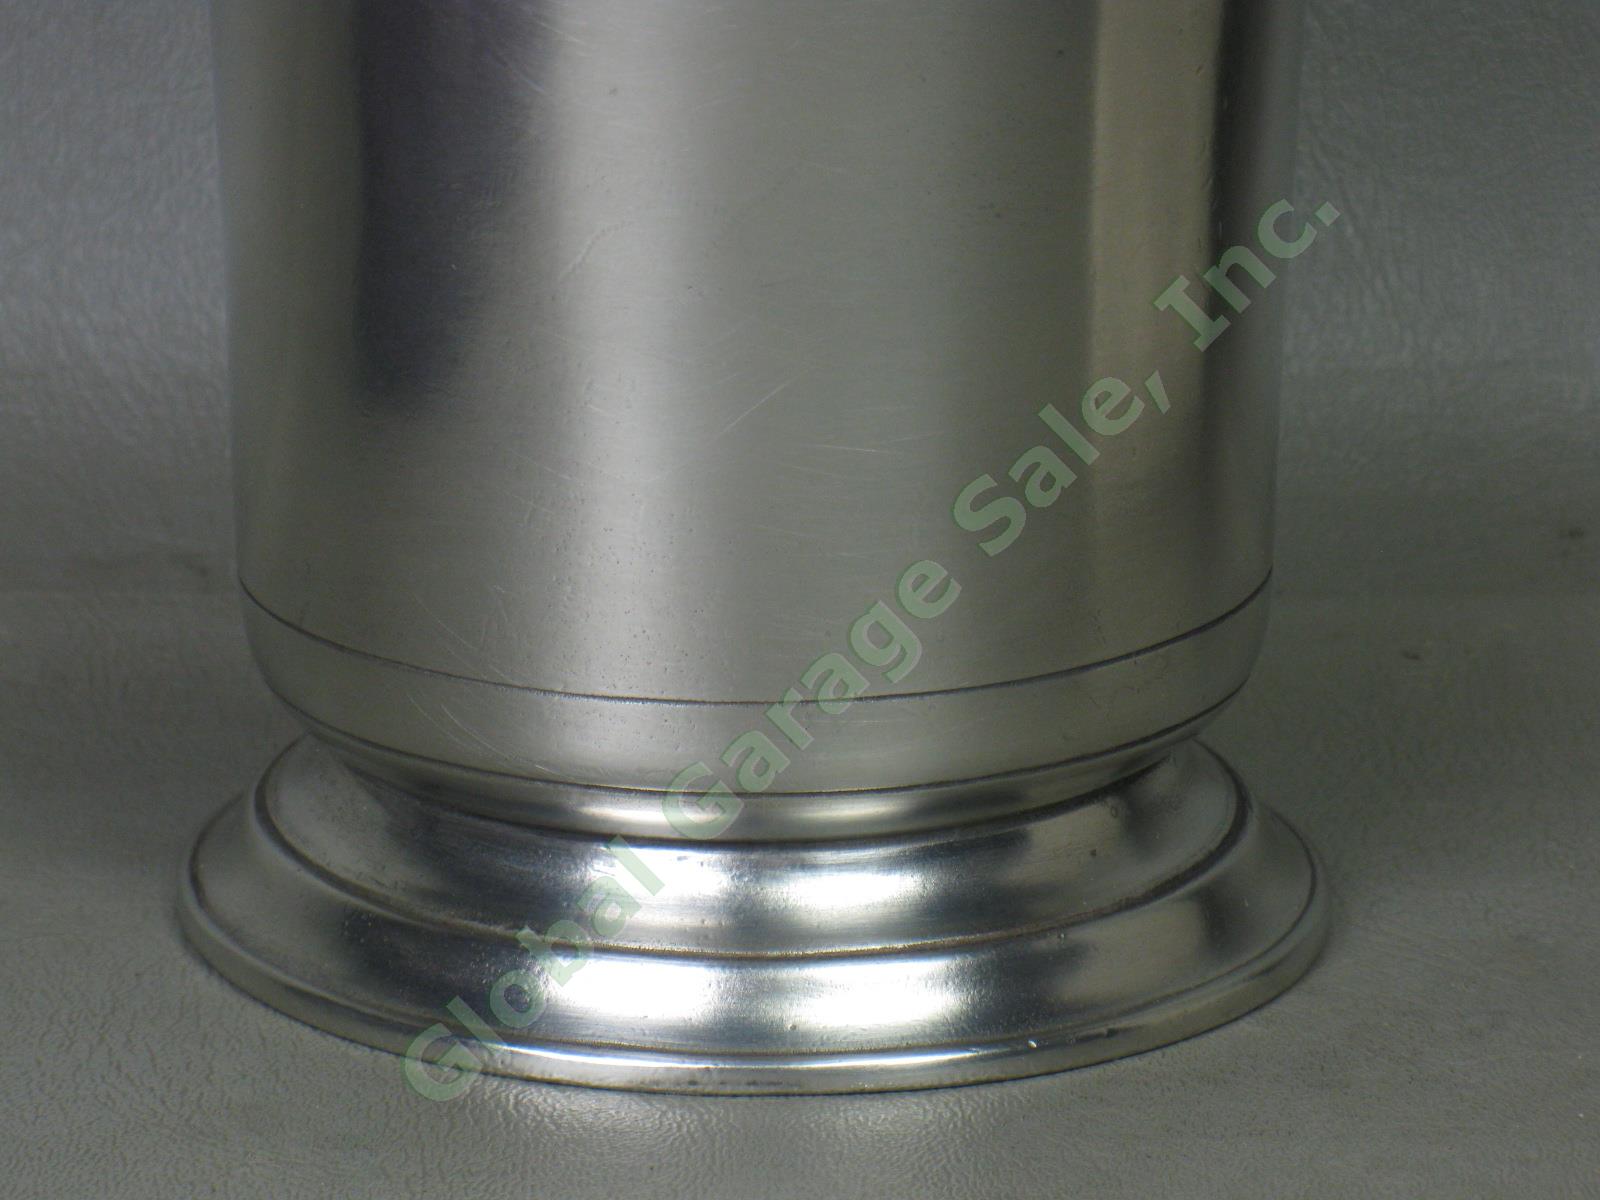 NEW Match Pewter 6.5" Large Tumbler Vase Handmade In Italy Antique Finish NO RES 3